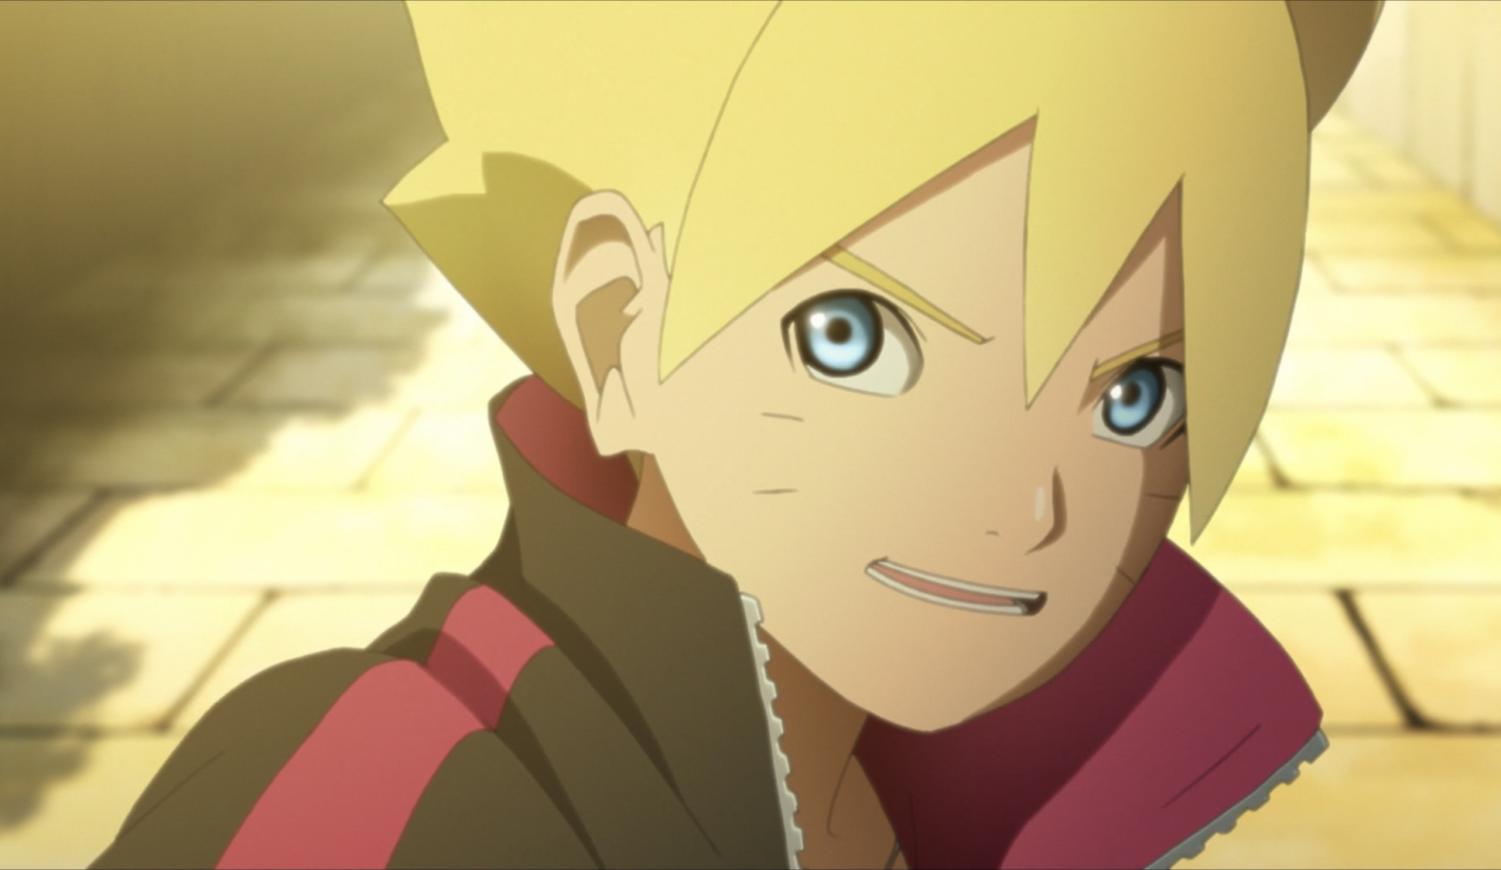 Brothers – Boruto Episode 201 “Empty Tears” – The Voyager